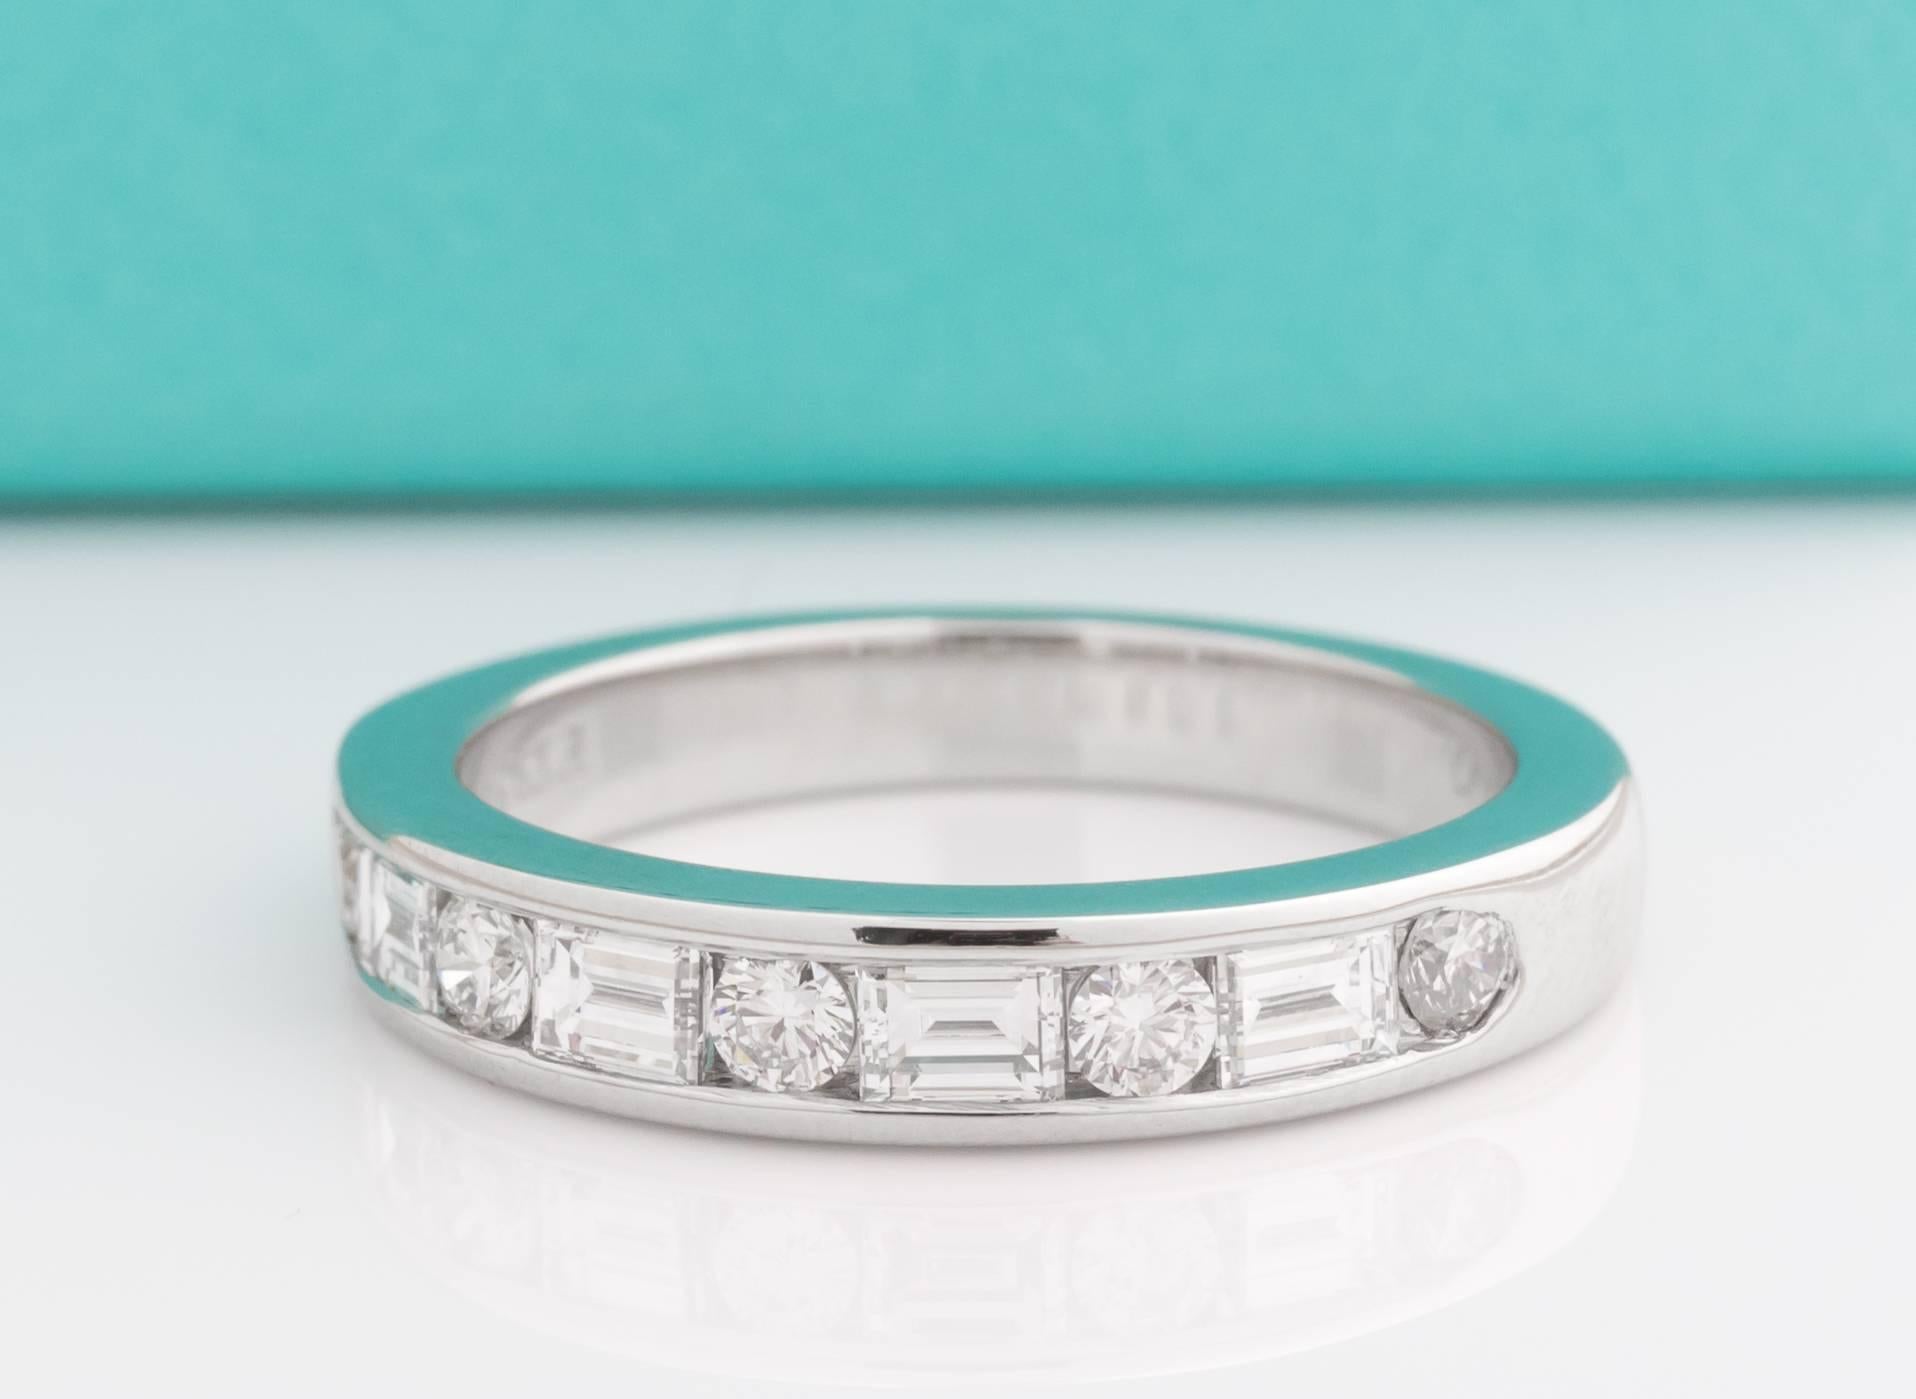 Tiffany & Co channel-set band ring with a half circle of round brilliant diamonds and baguette diamonds placed in alternating pattern. All diamonds are F color and VS clarity. Round diamonds weigh 0.21cts total and baguettes weigh 0.45cts total. The